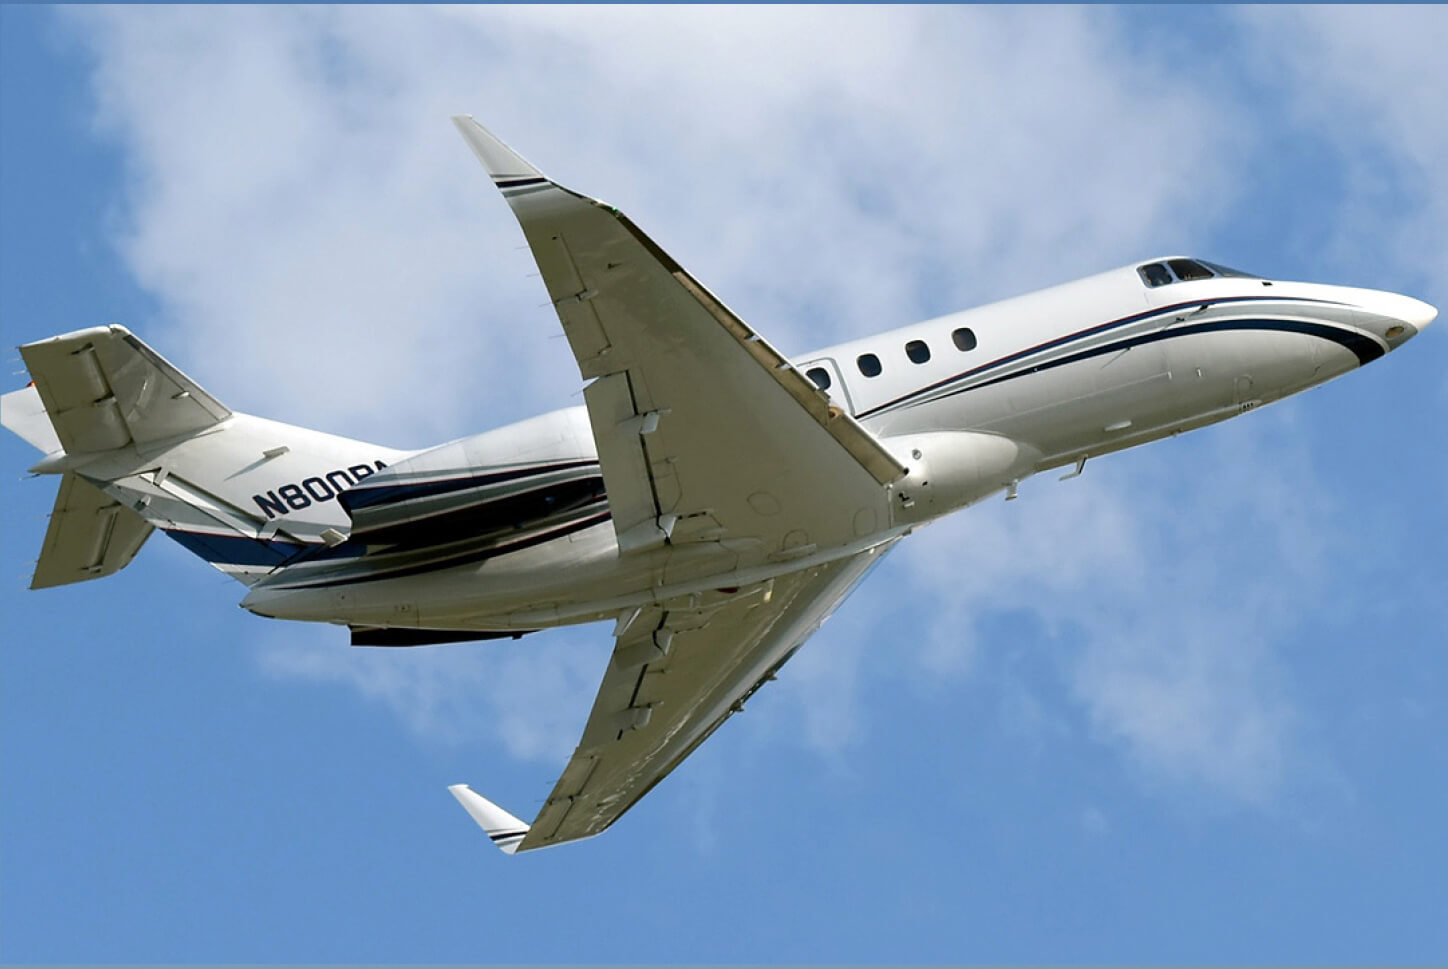 Hawker 800SP SN258162 Model in Air Shot From Ground